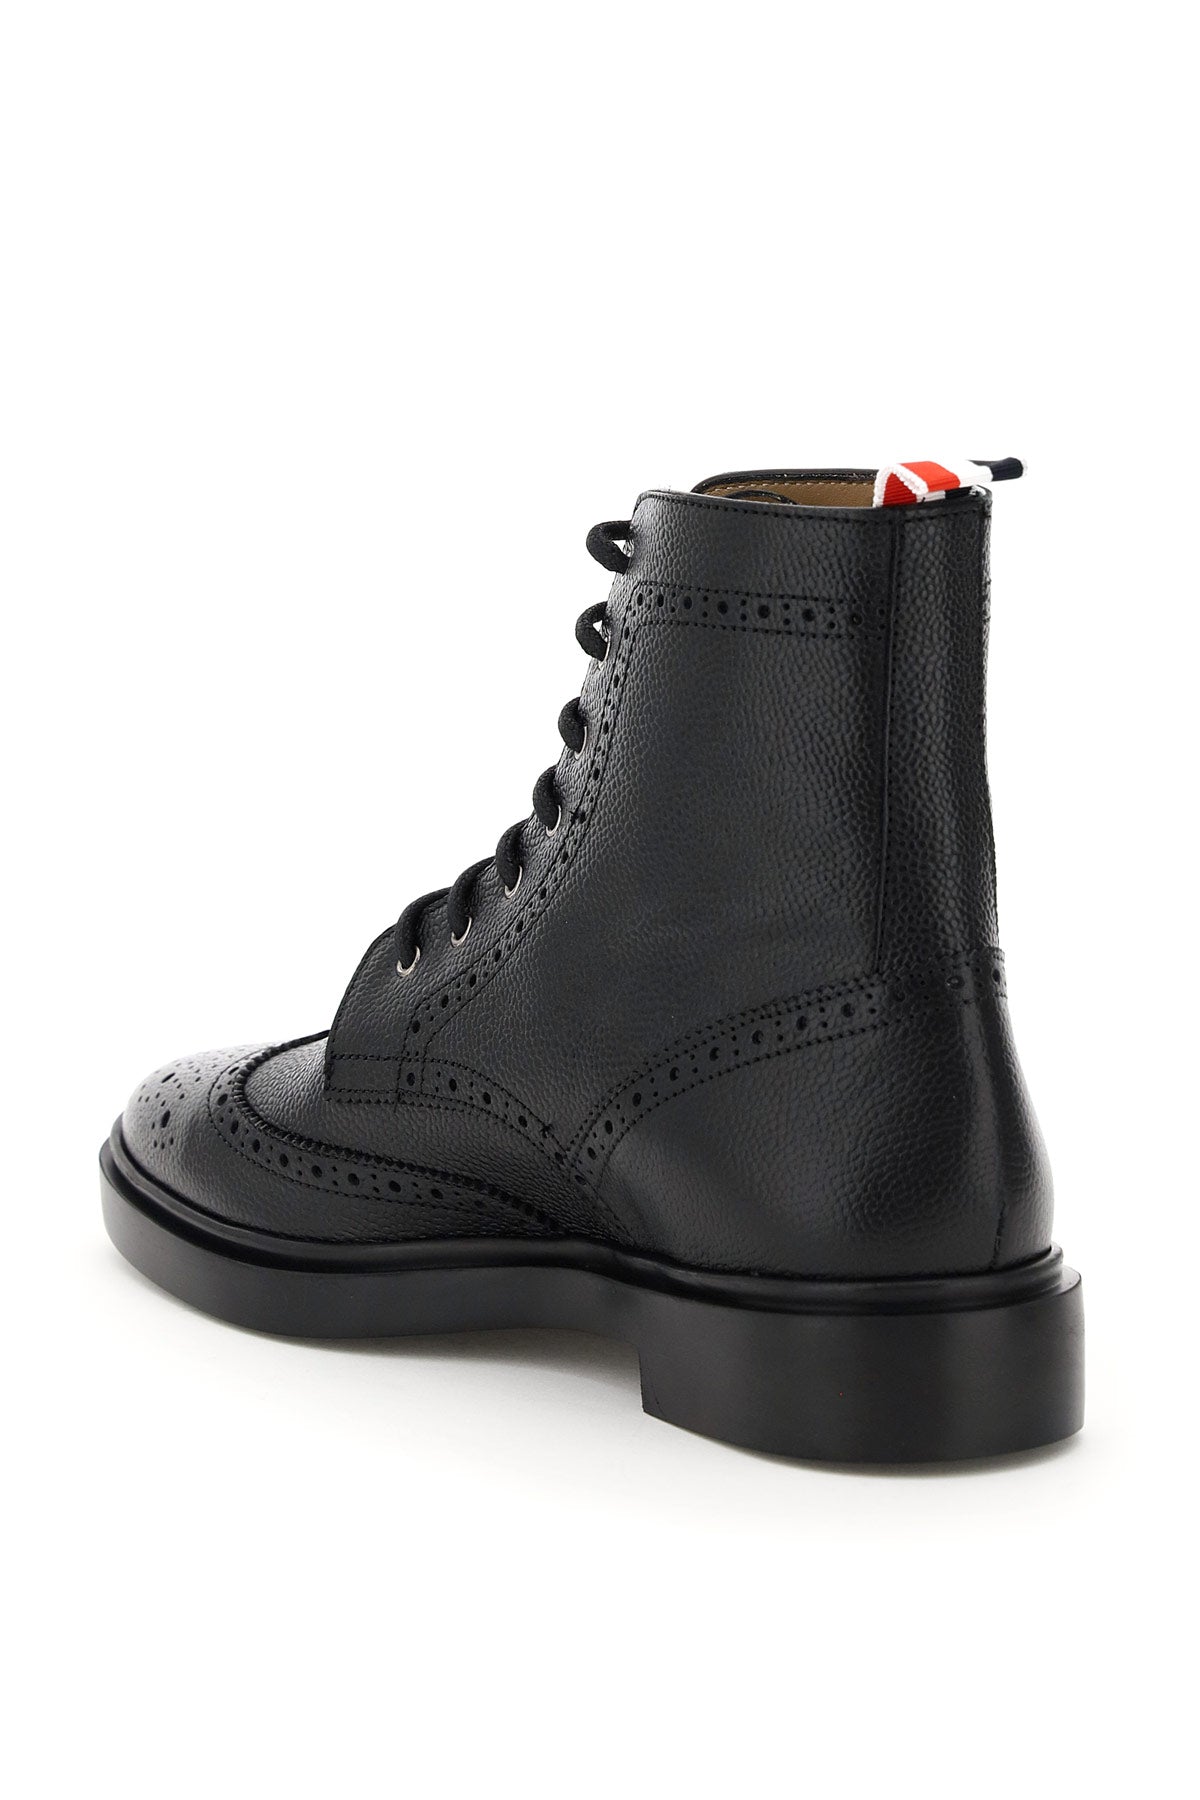 Thom browne wingtip brogue ankle boots-2